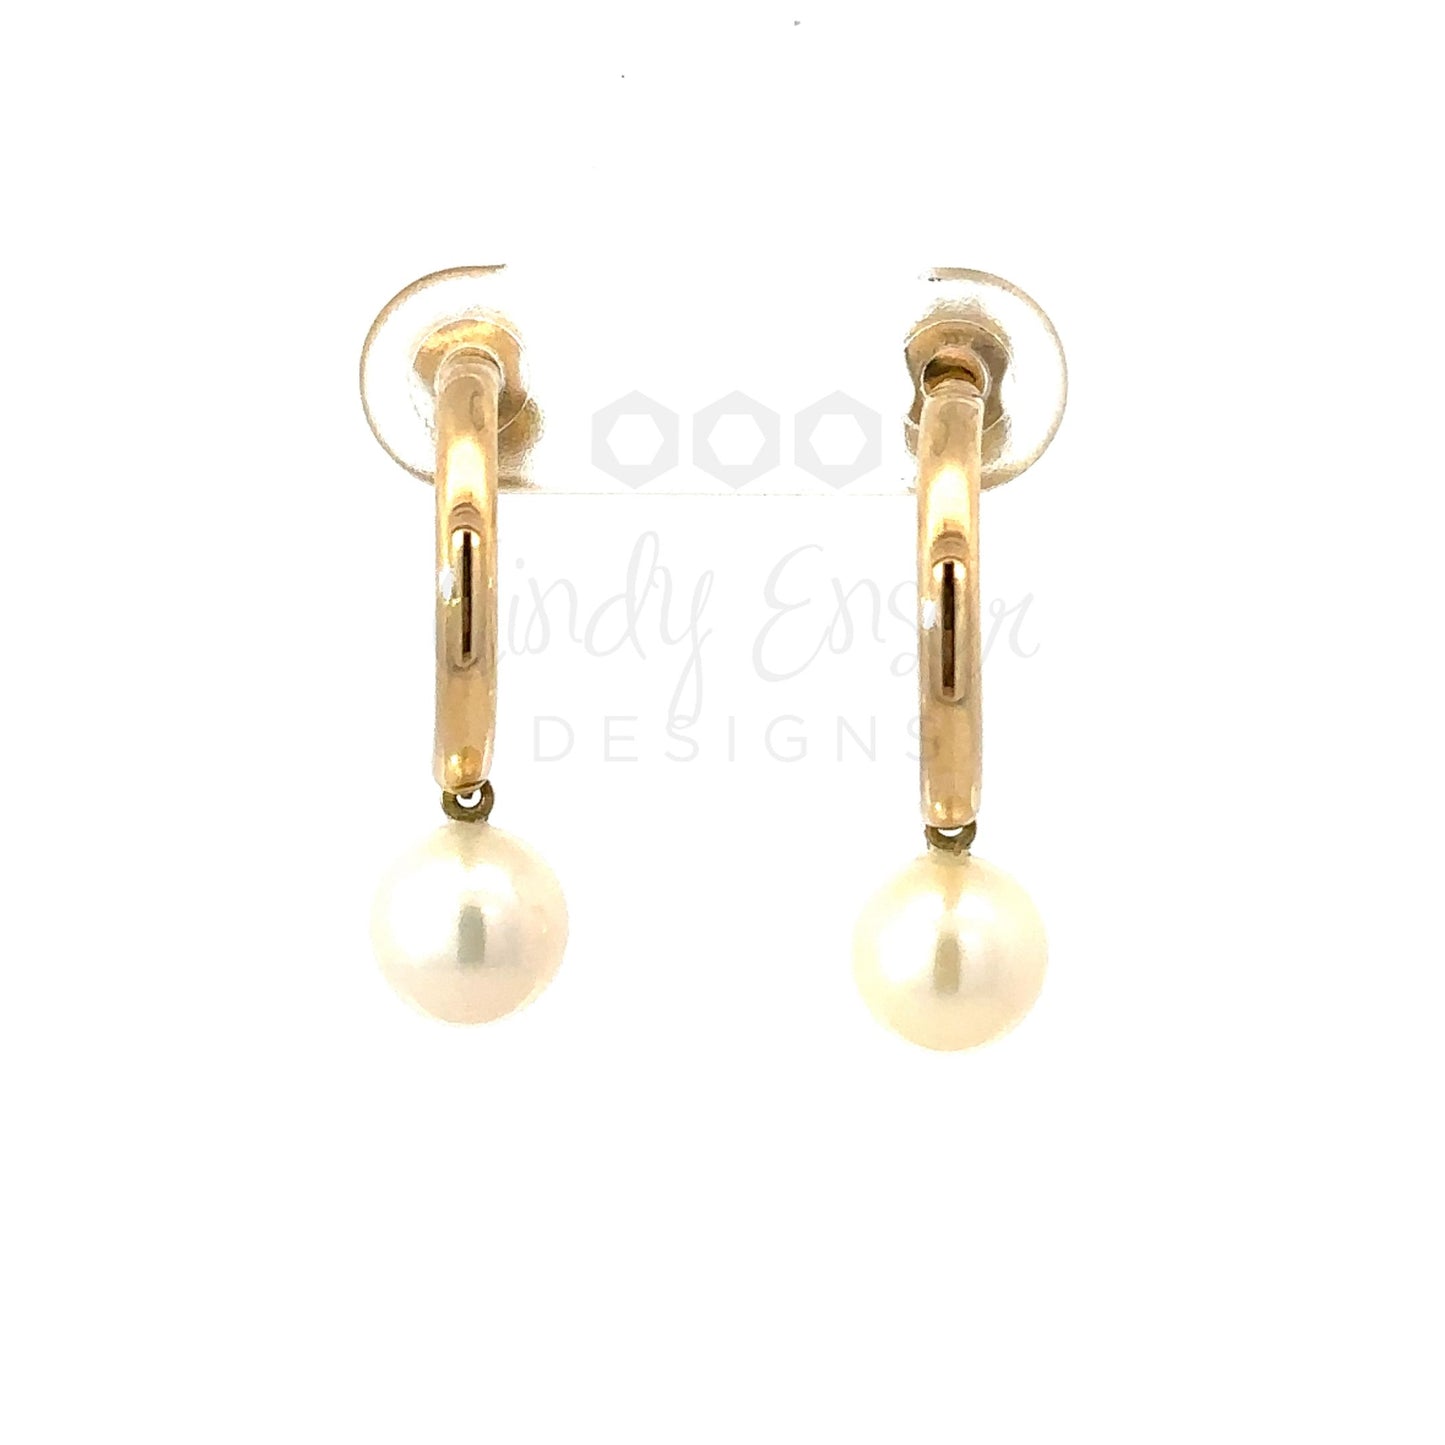 Yellow Gold Half Hoop Earring with Pearl Drop